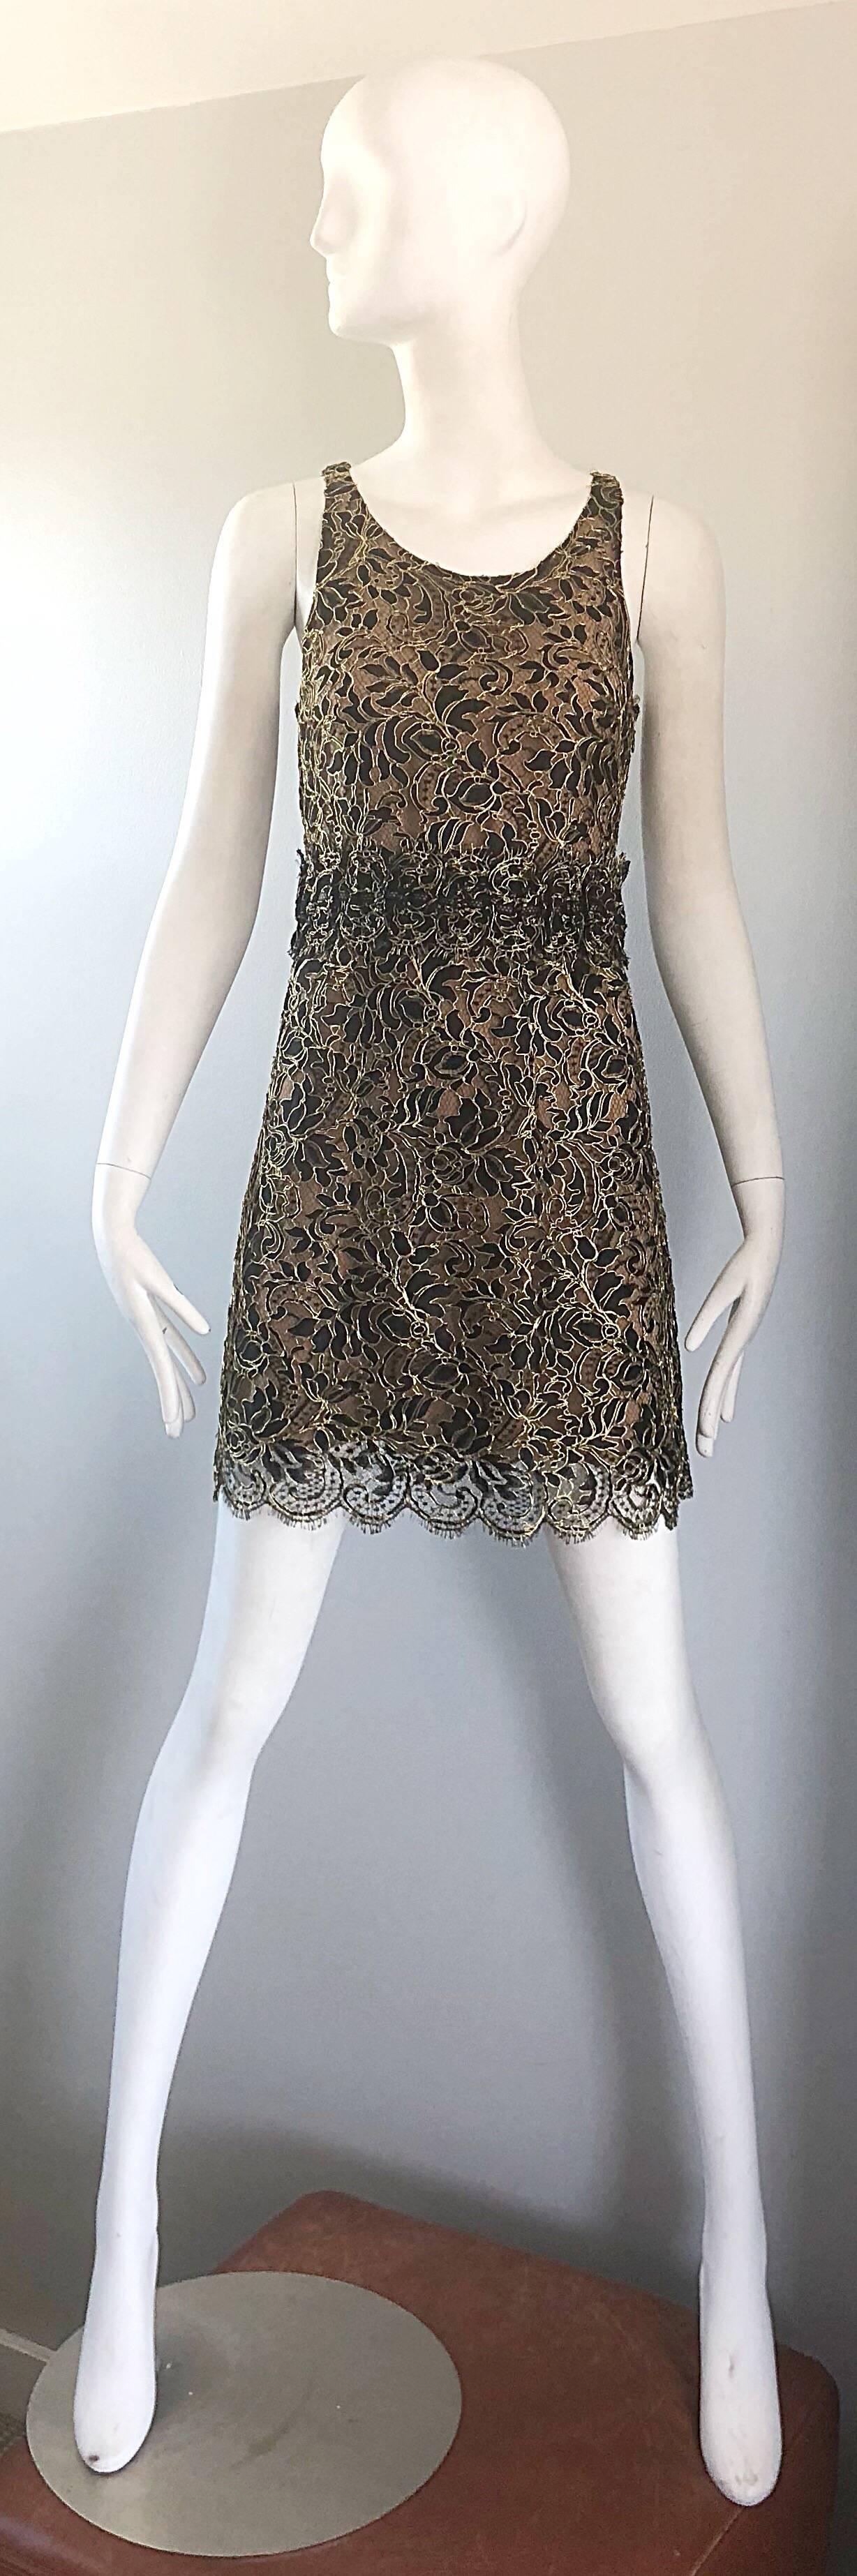 Gorgeous early 2000s BALENCIAGA by NICOLAS GHESQUIERE black, gold and nude silk chiffon lace cocktail dress! Features a nude silk chiffon underlay with black and gold French lace over. Balenciaga pieces from the Ghesquiere era are highly